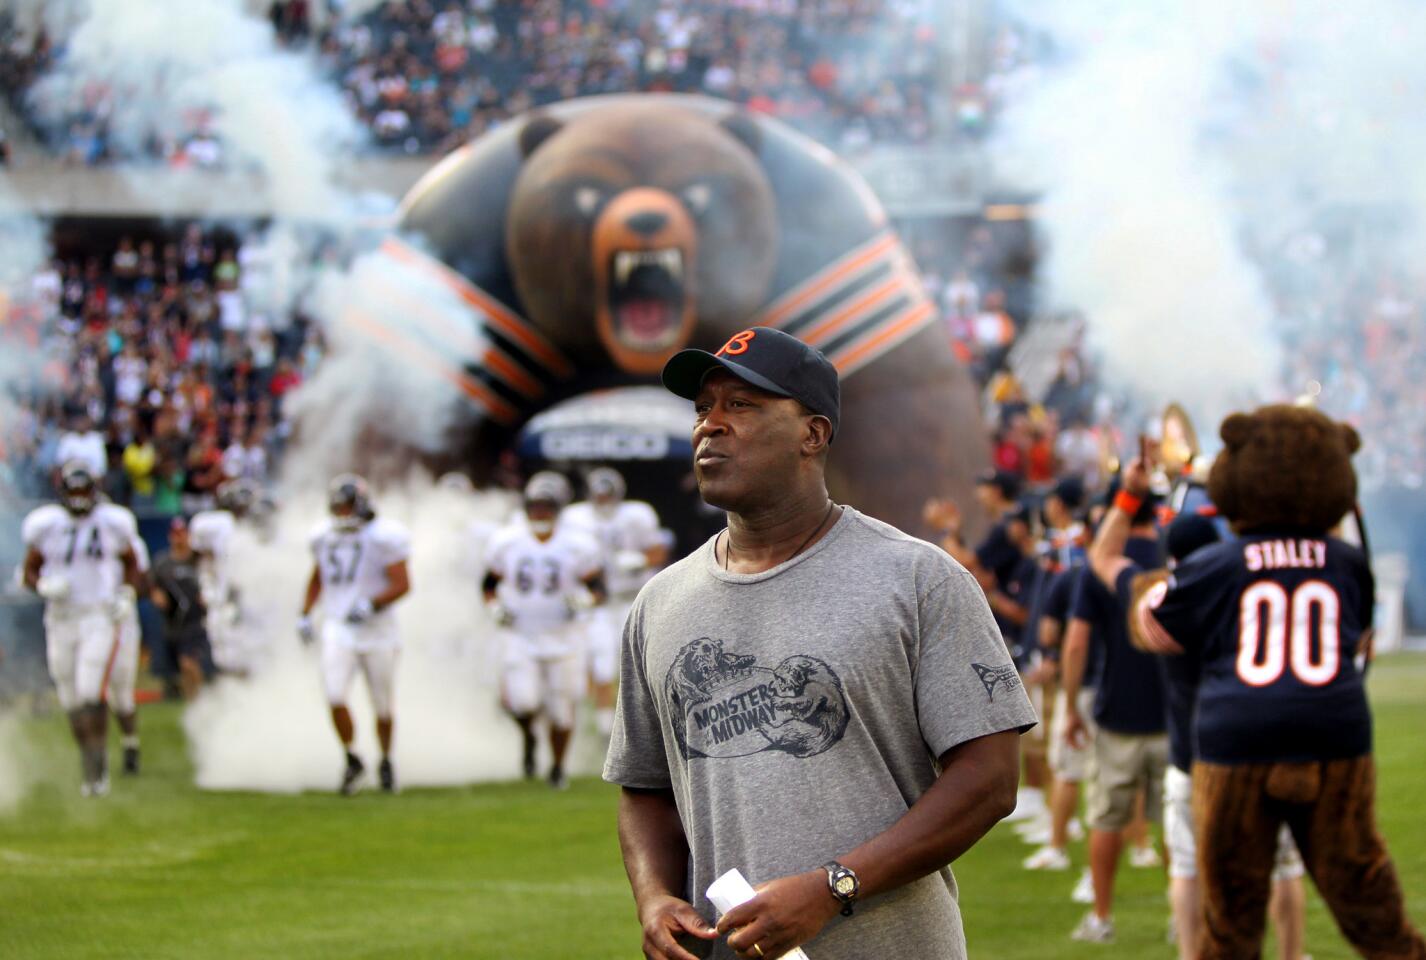 Lovie Smith walks on the field as the team is announced during the Family Night practice at Soldier Field on Aug. 6, 2010.